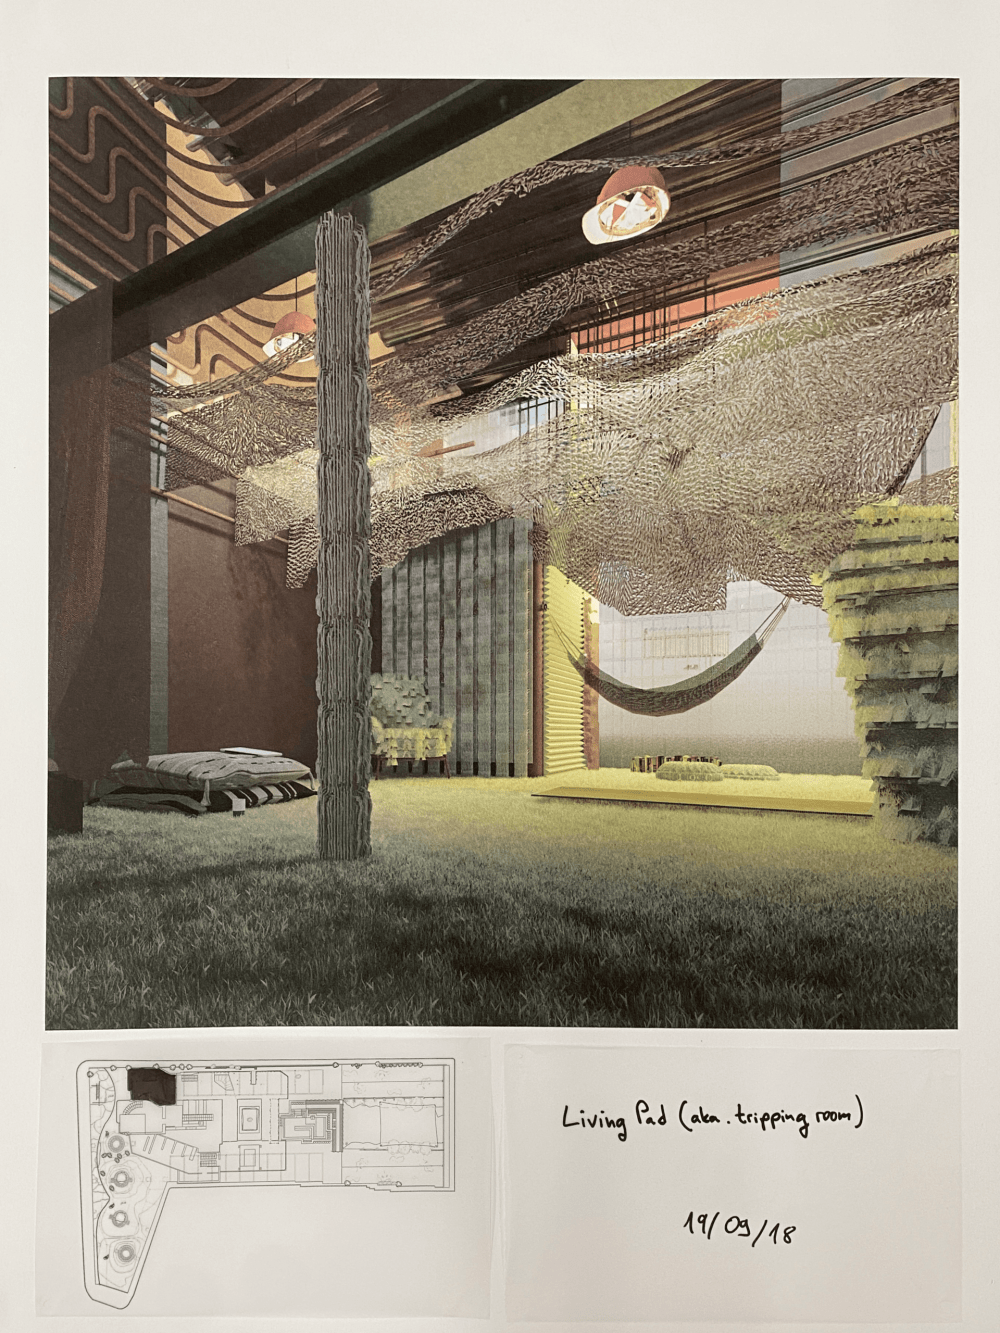 Image of a large photograph of a space with a hammock, and a floor which looks like grass, with a smaller aerial plan of the same space underneath it, along with a handwritten label.